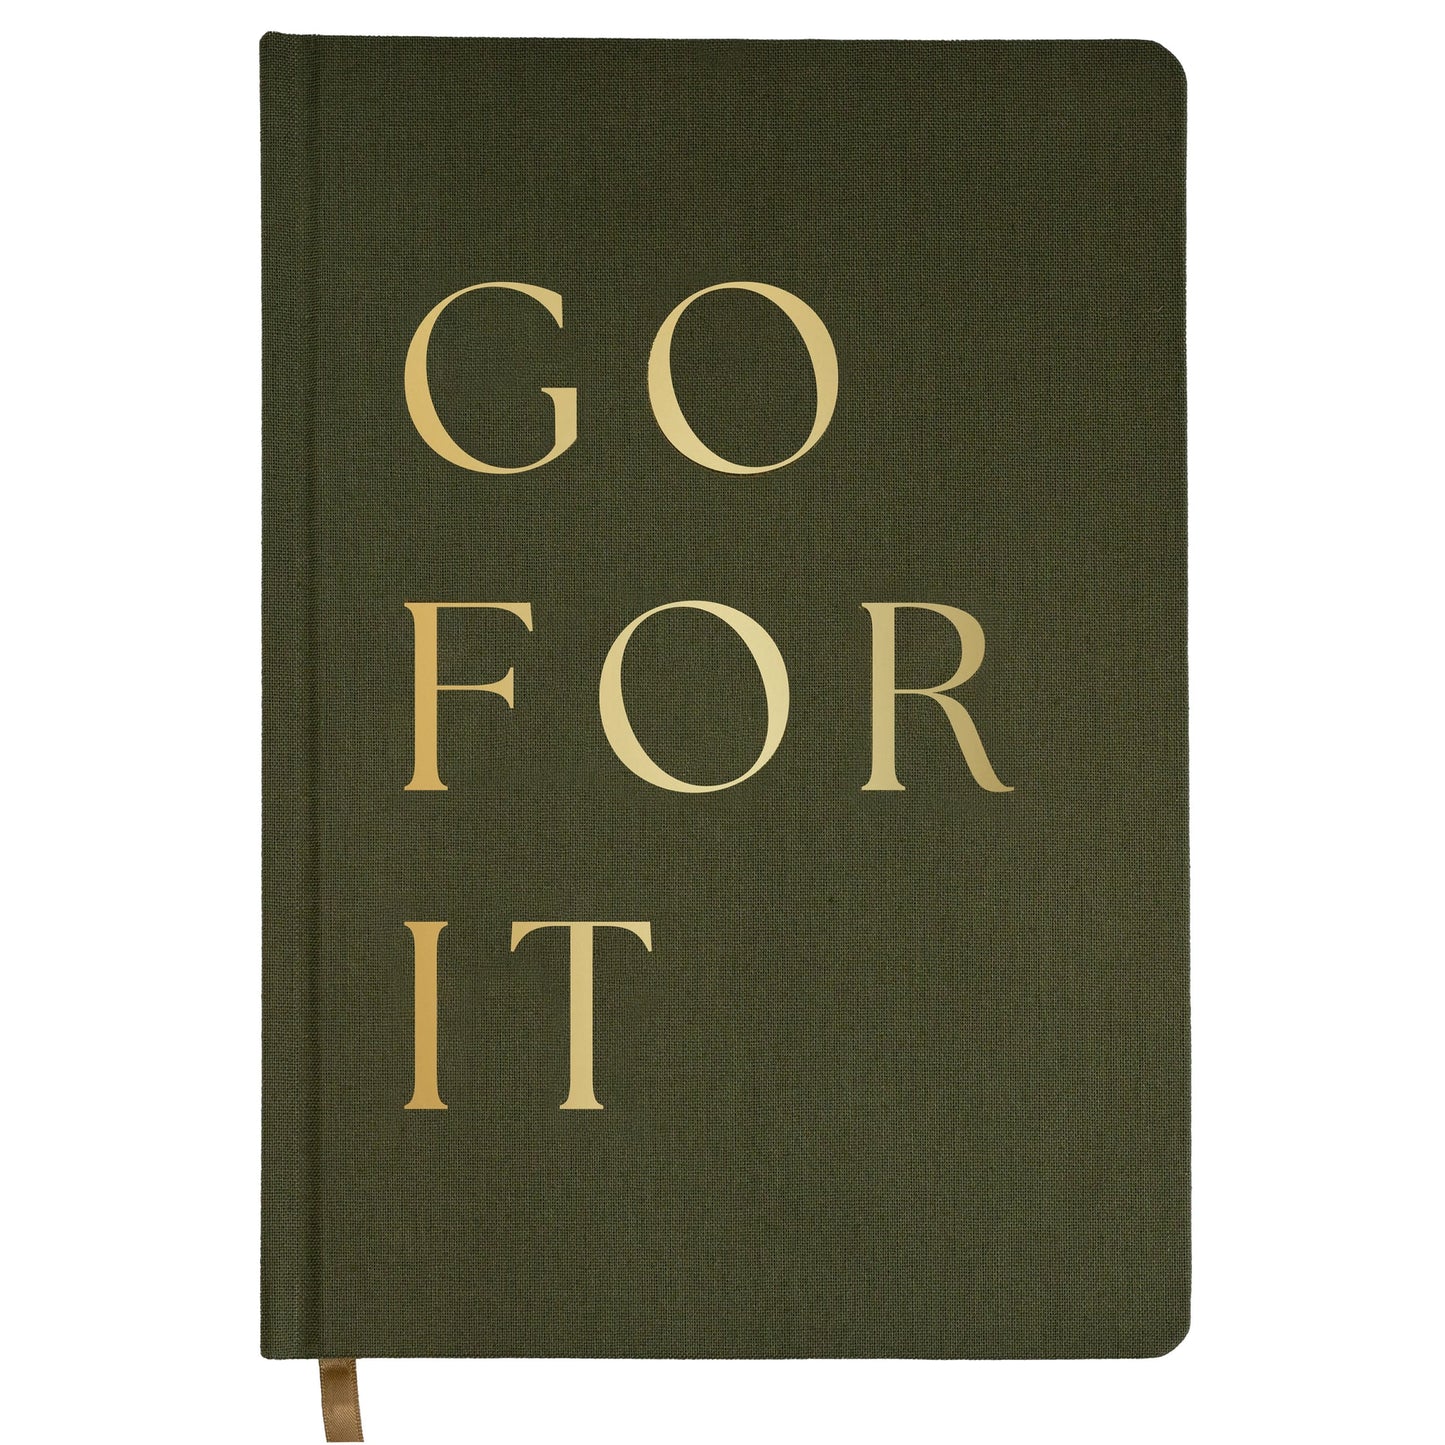 Fabric Journal: Go For It